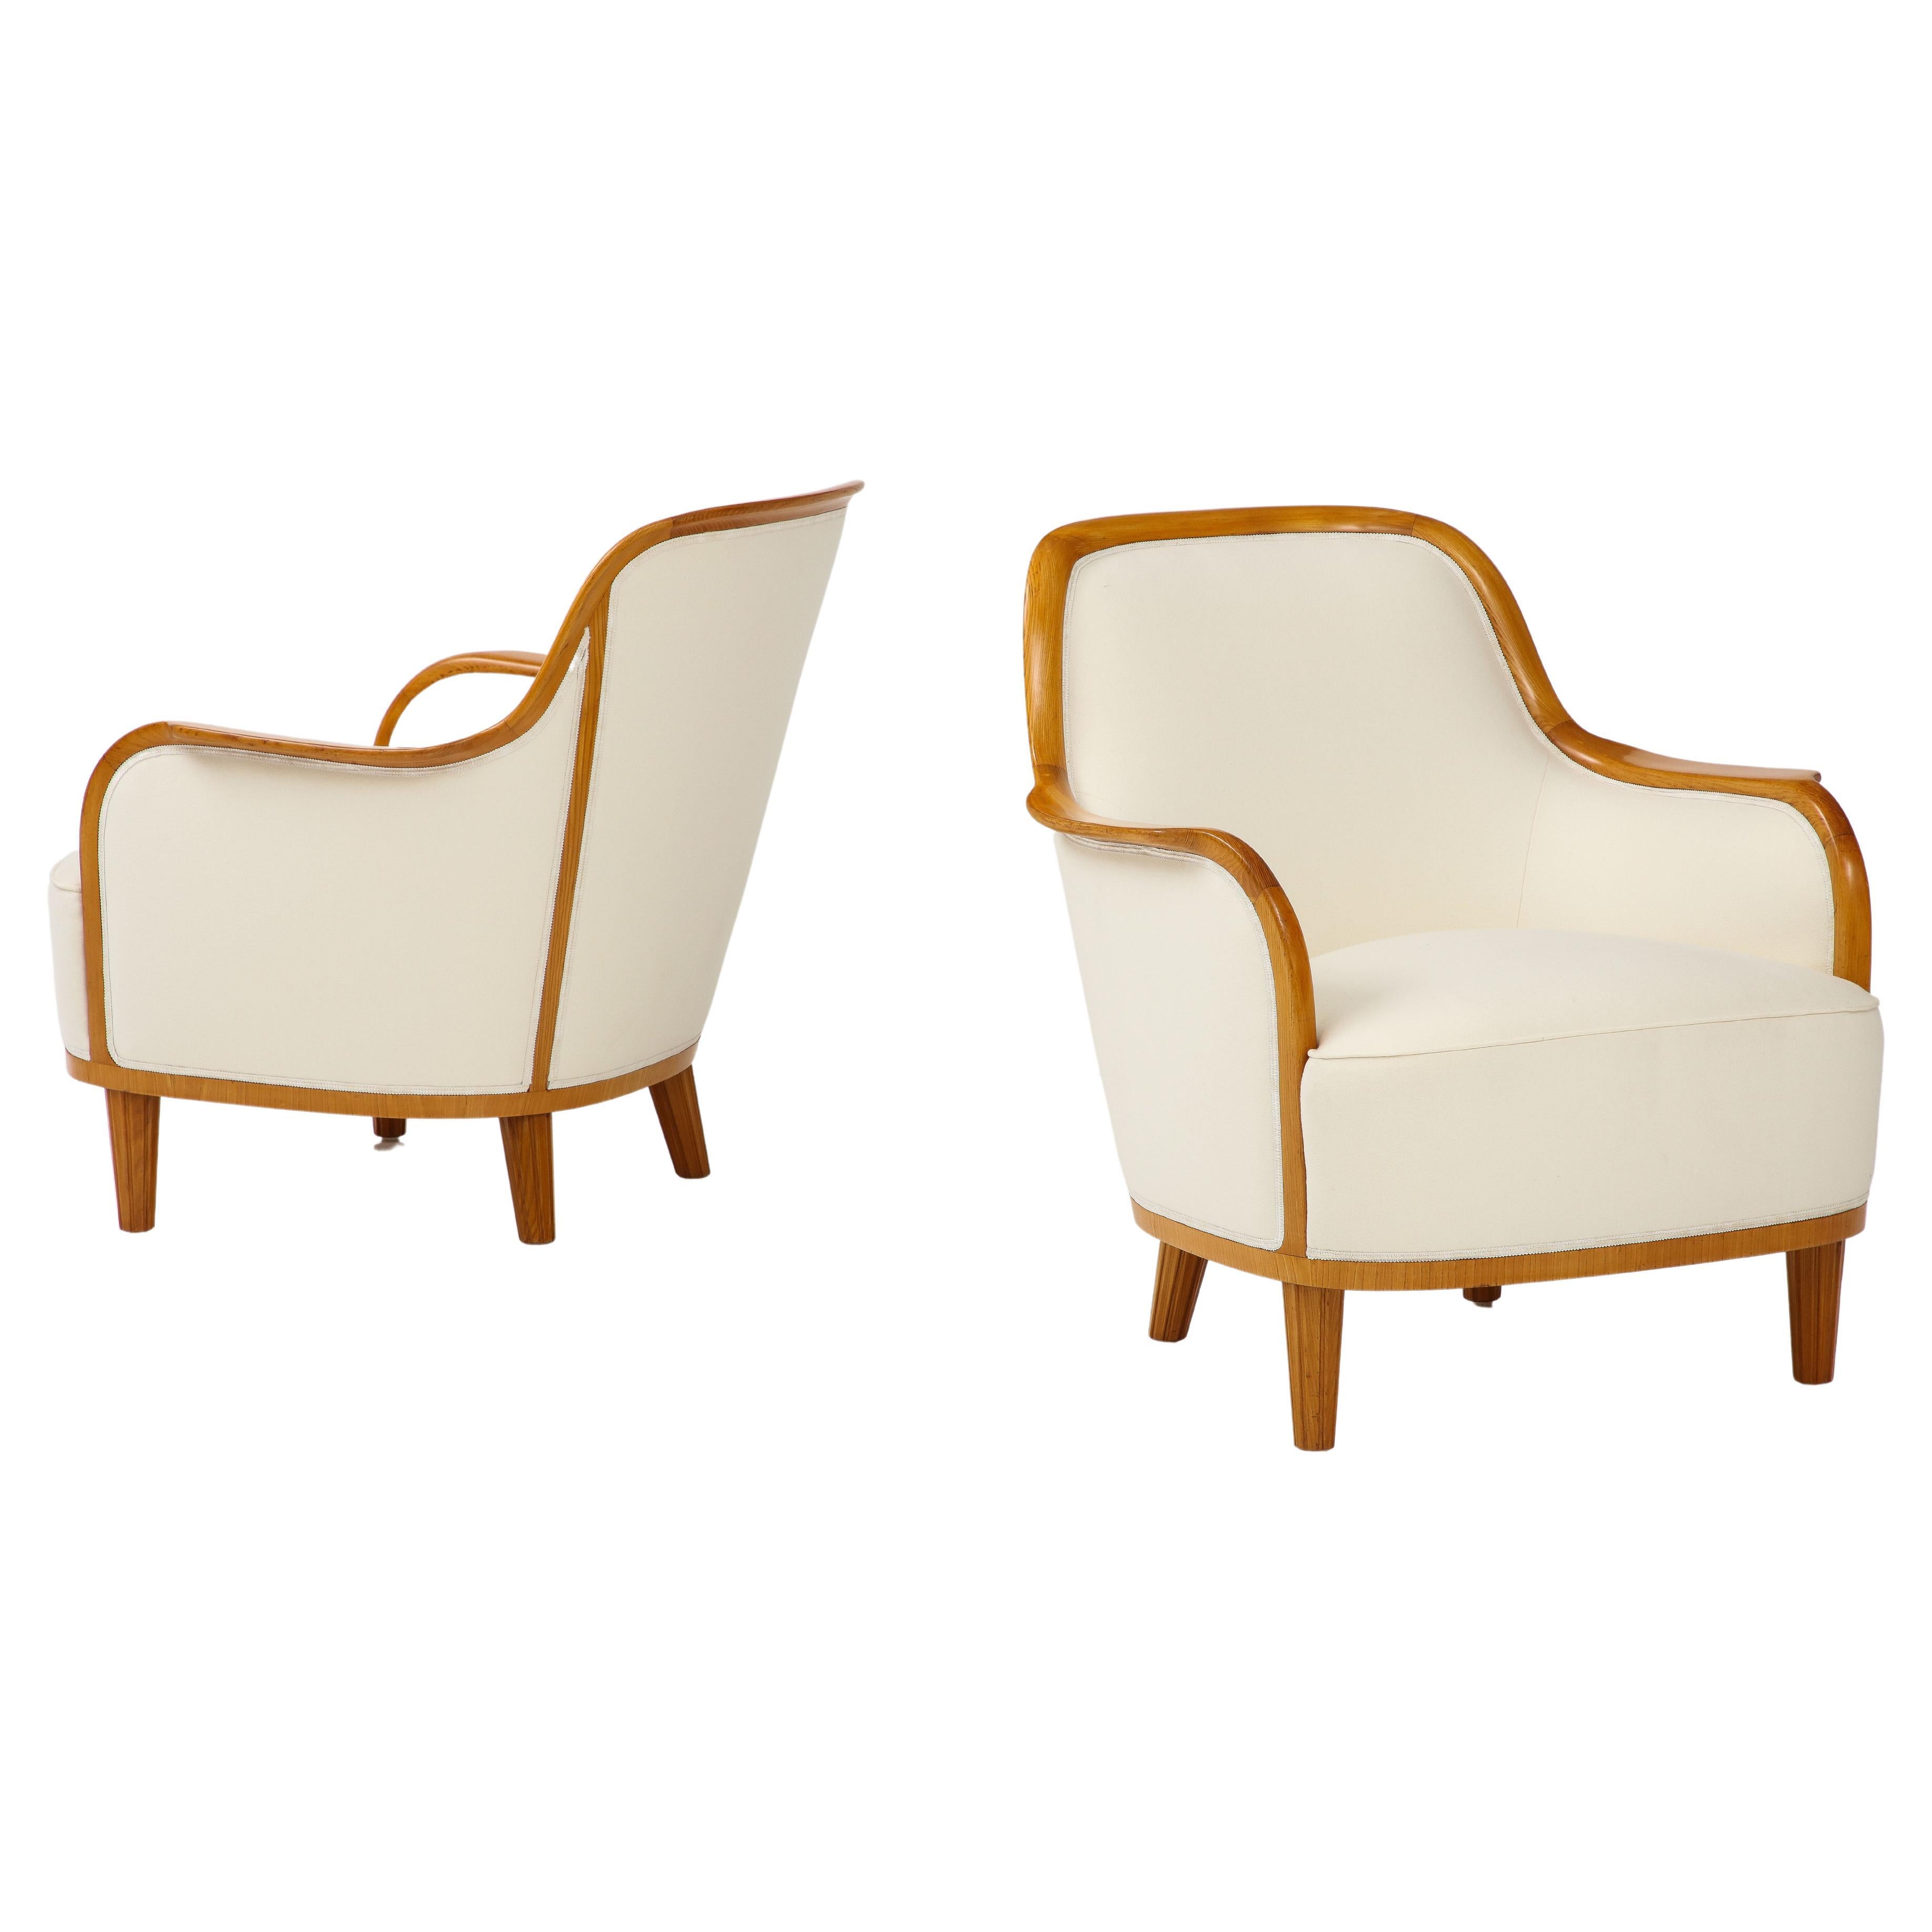 A pair of Swedish Grace elmwood and upholstered armchairs, produced by SMF Svenska Möbelfabriken Bodafors, with a generous curved back, downswept armrest, upholstered seat raised on circular fluted legs. New off white wool upholstery.